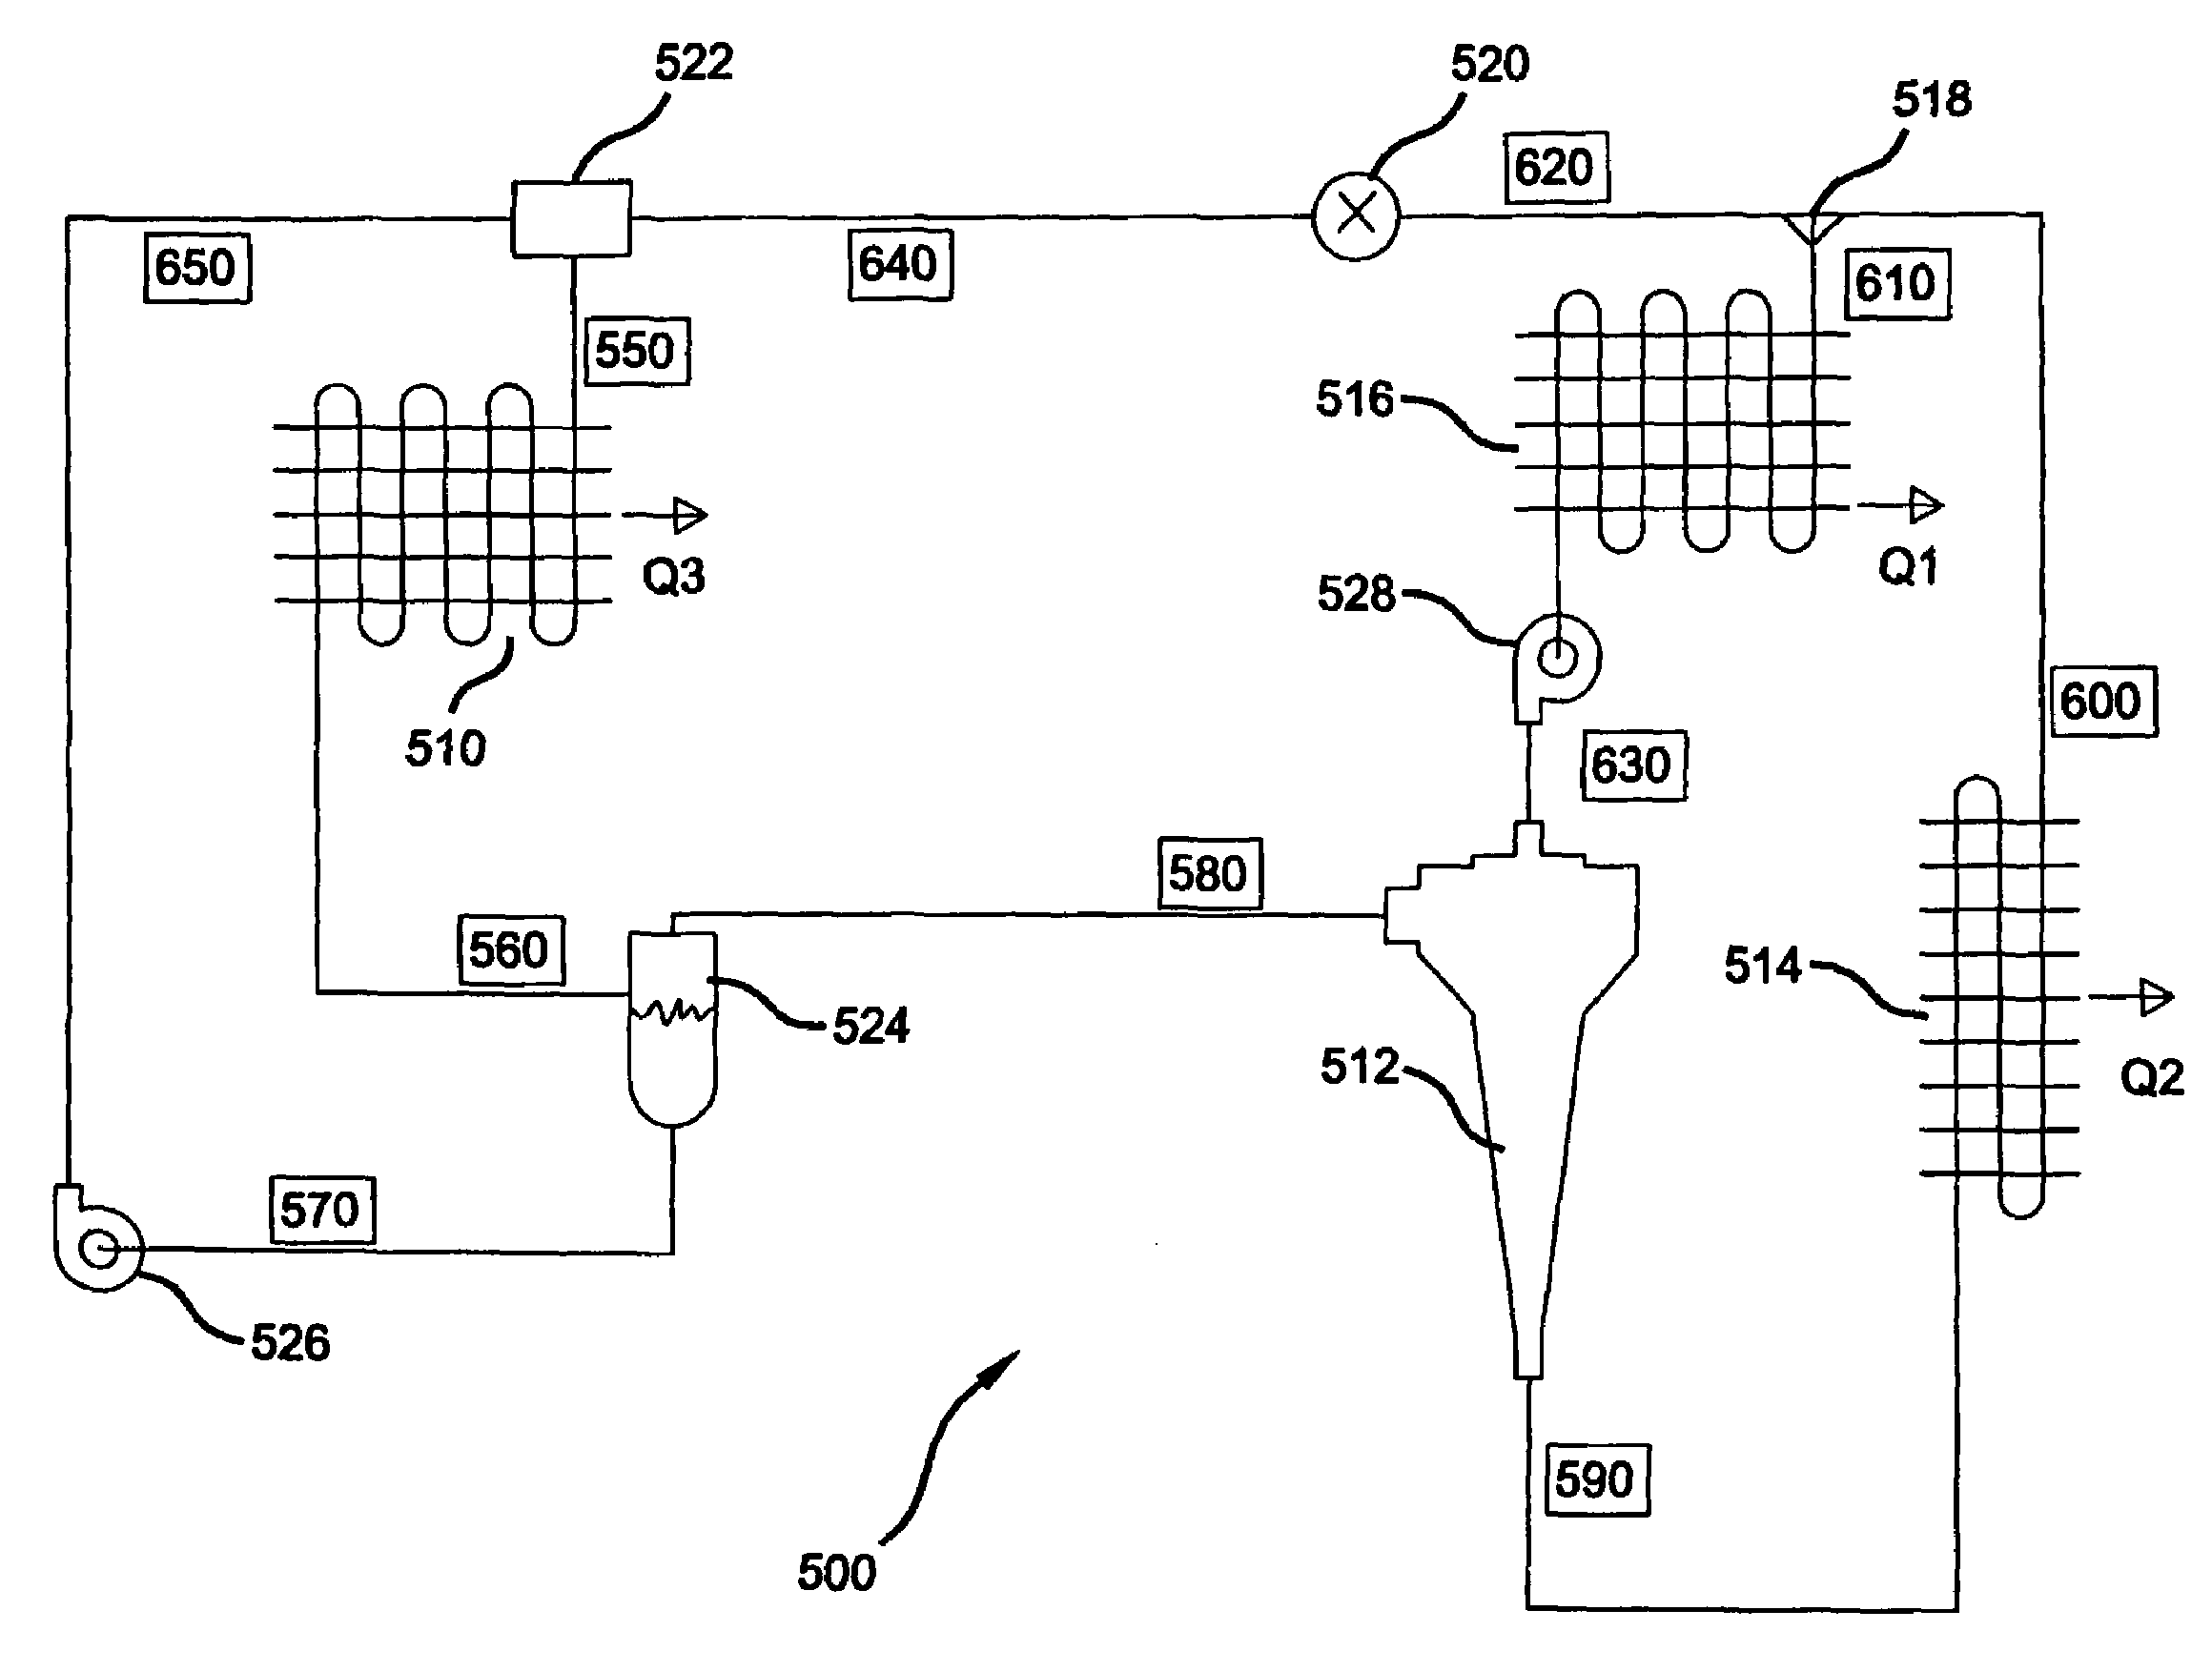 Supersonic vapor compression and heat rejection cycle